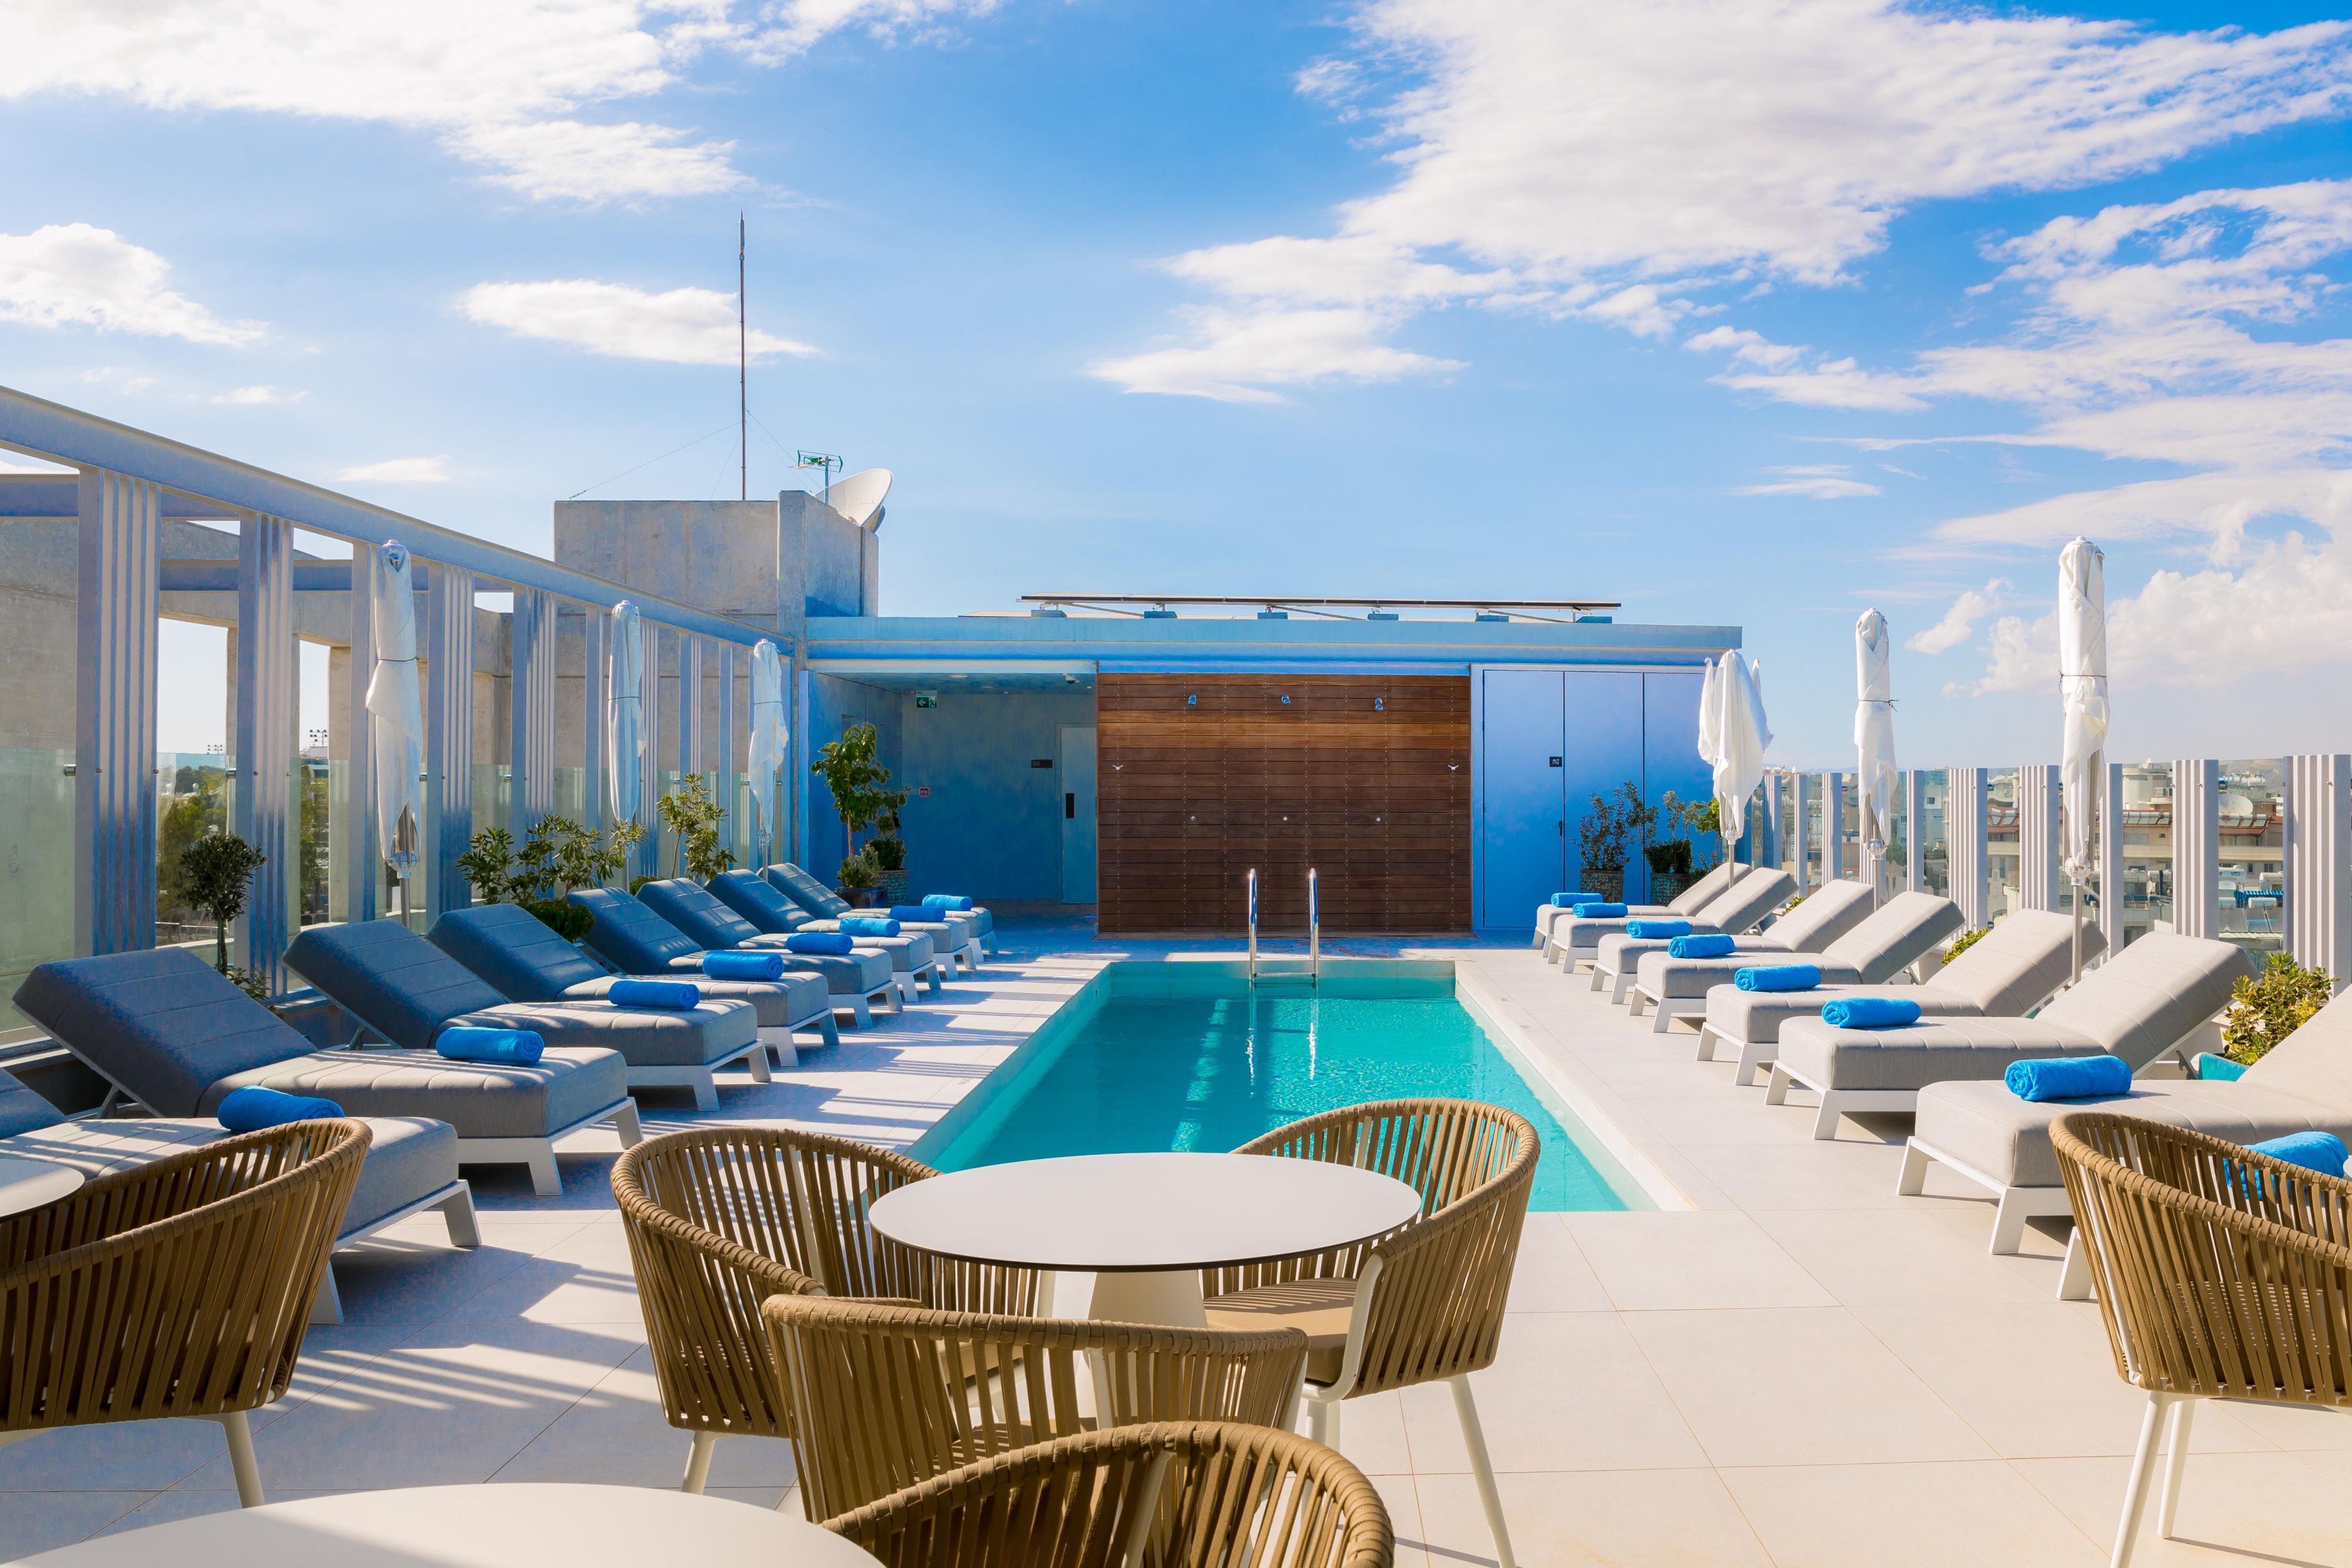 A stunning Rooftop Pool Bar where you can enjoy a refreshing cocktail or a snack while capturing breathtaking views of the Mediterranean Sea and the city of Larnaca.